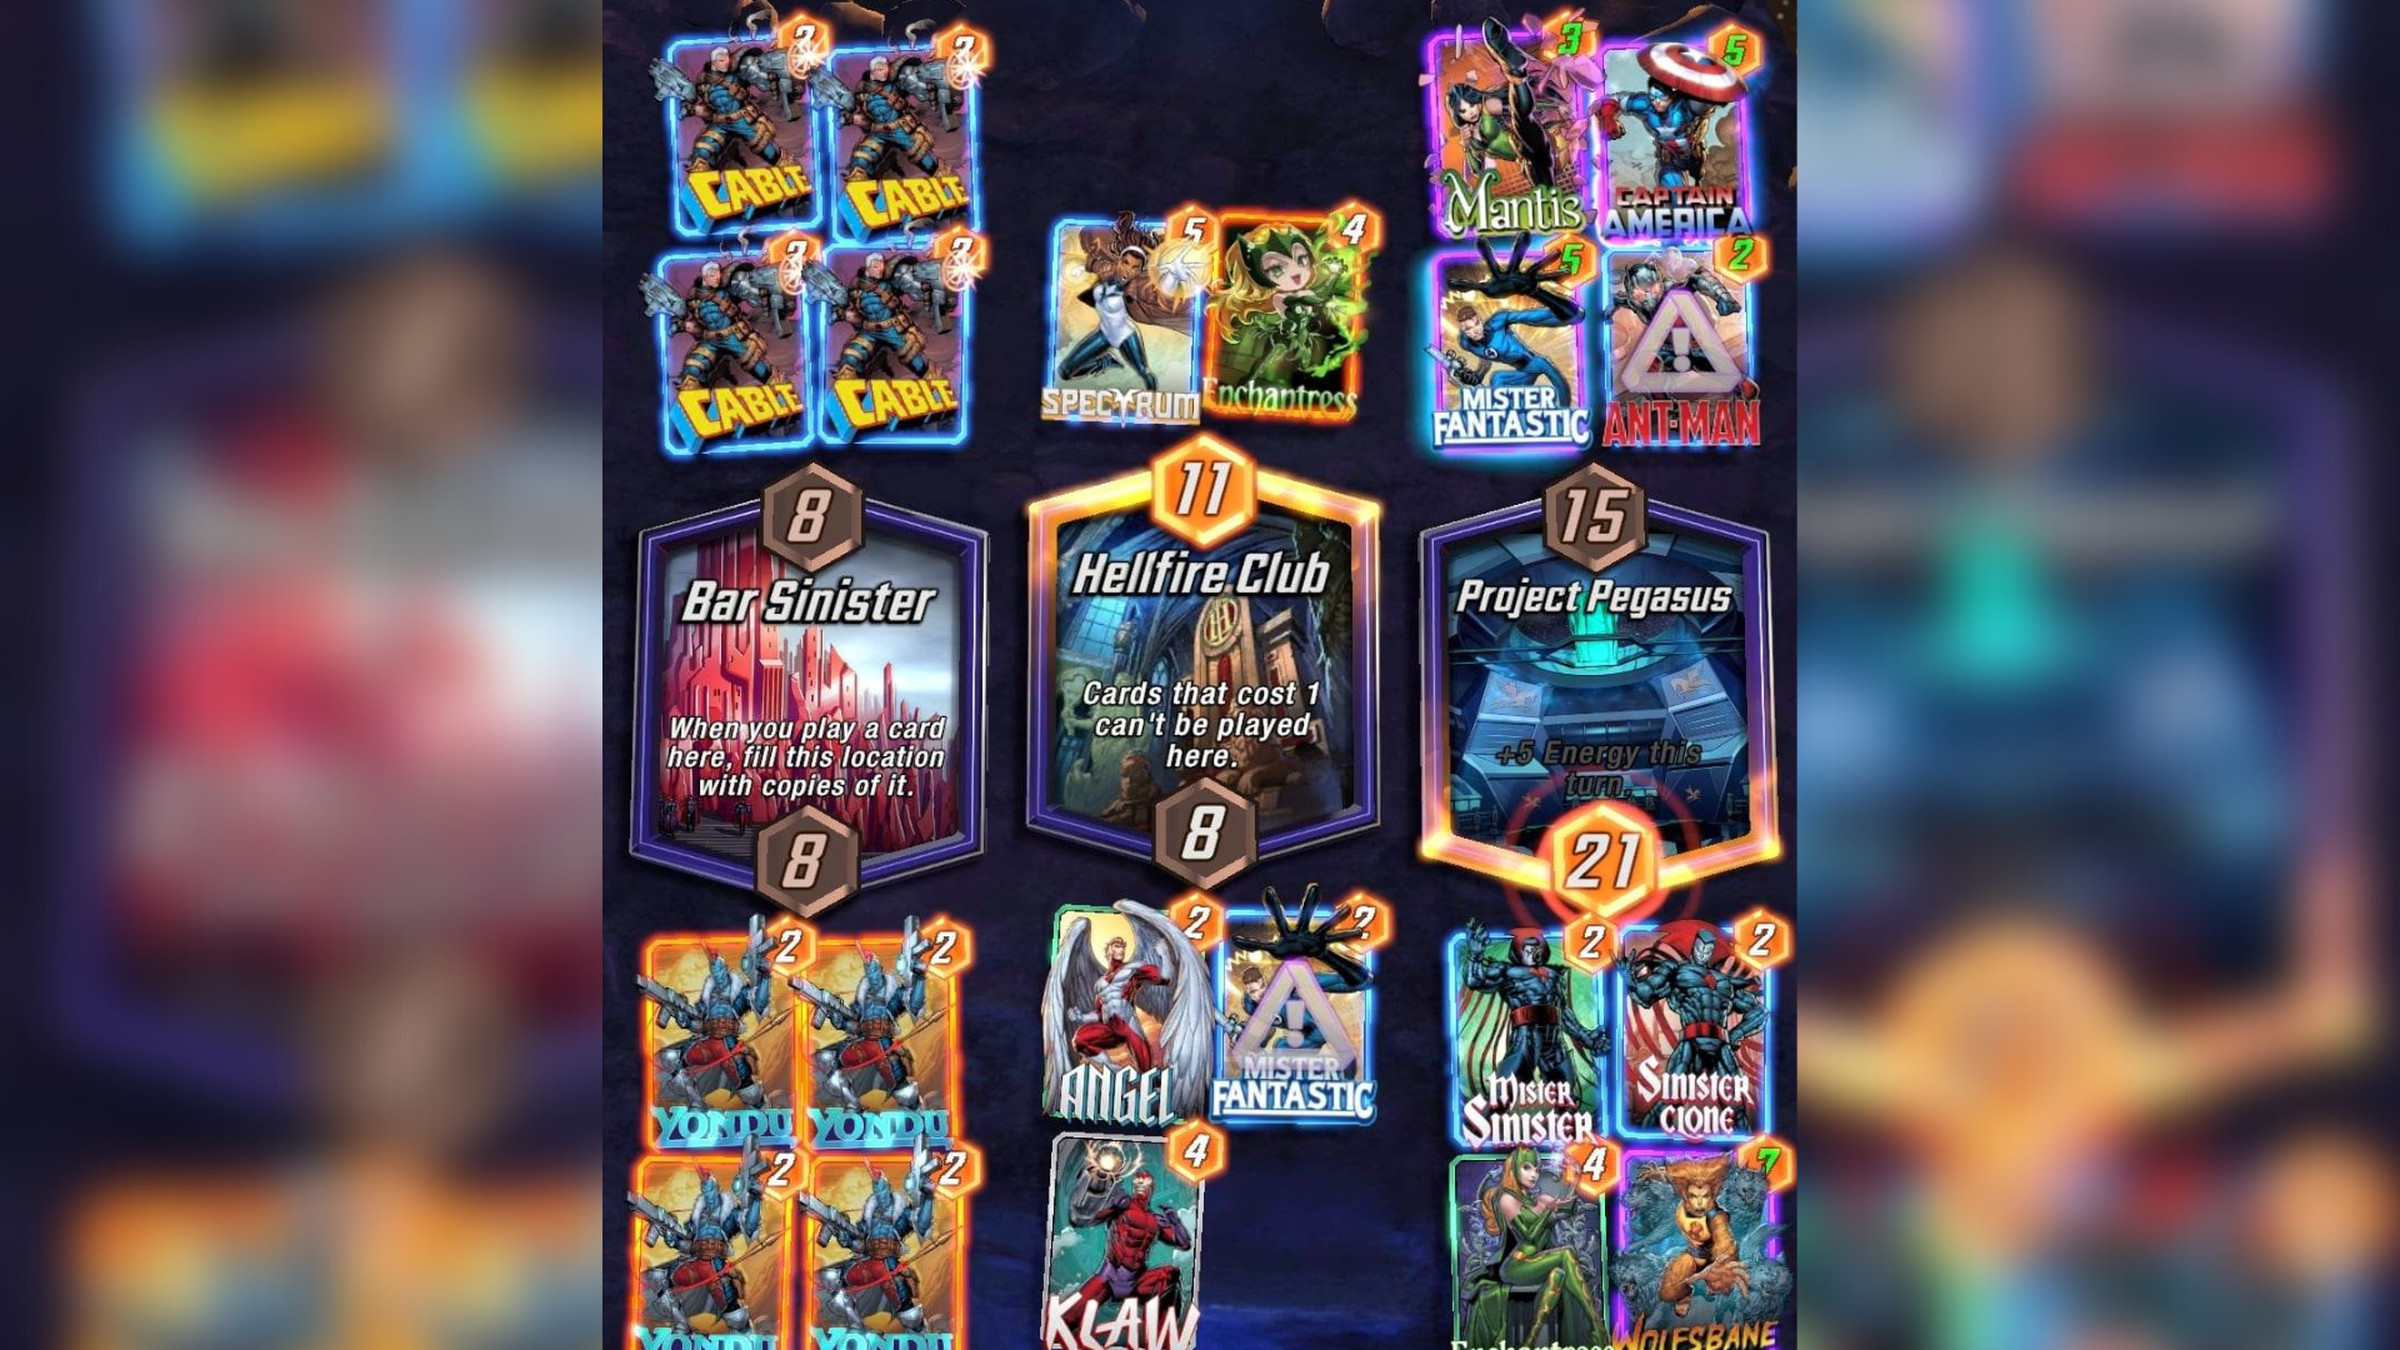 Marvel Snap gameplay screenshots. It features 3 locations with different effects and space for cards on each side.